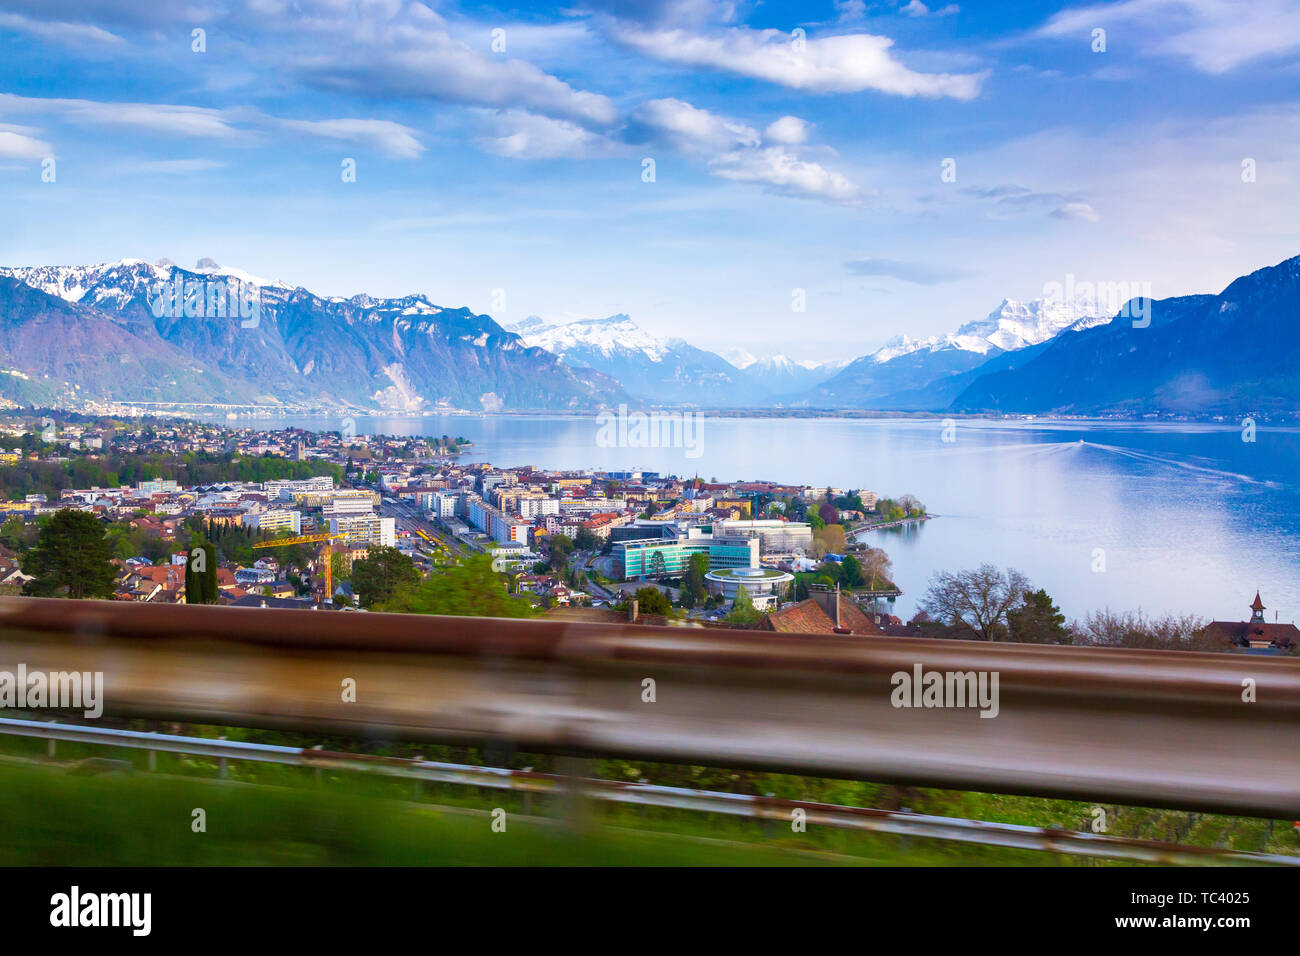 View of Montreux city and mountains taken from highway, Switzerland Stock Photo